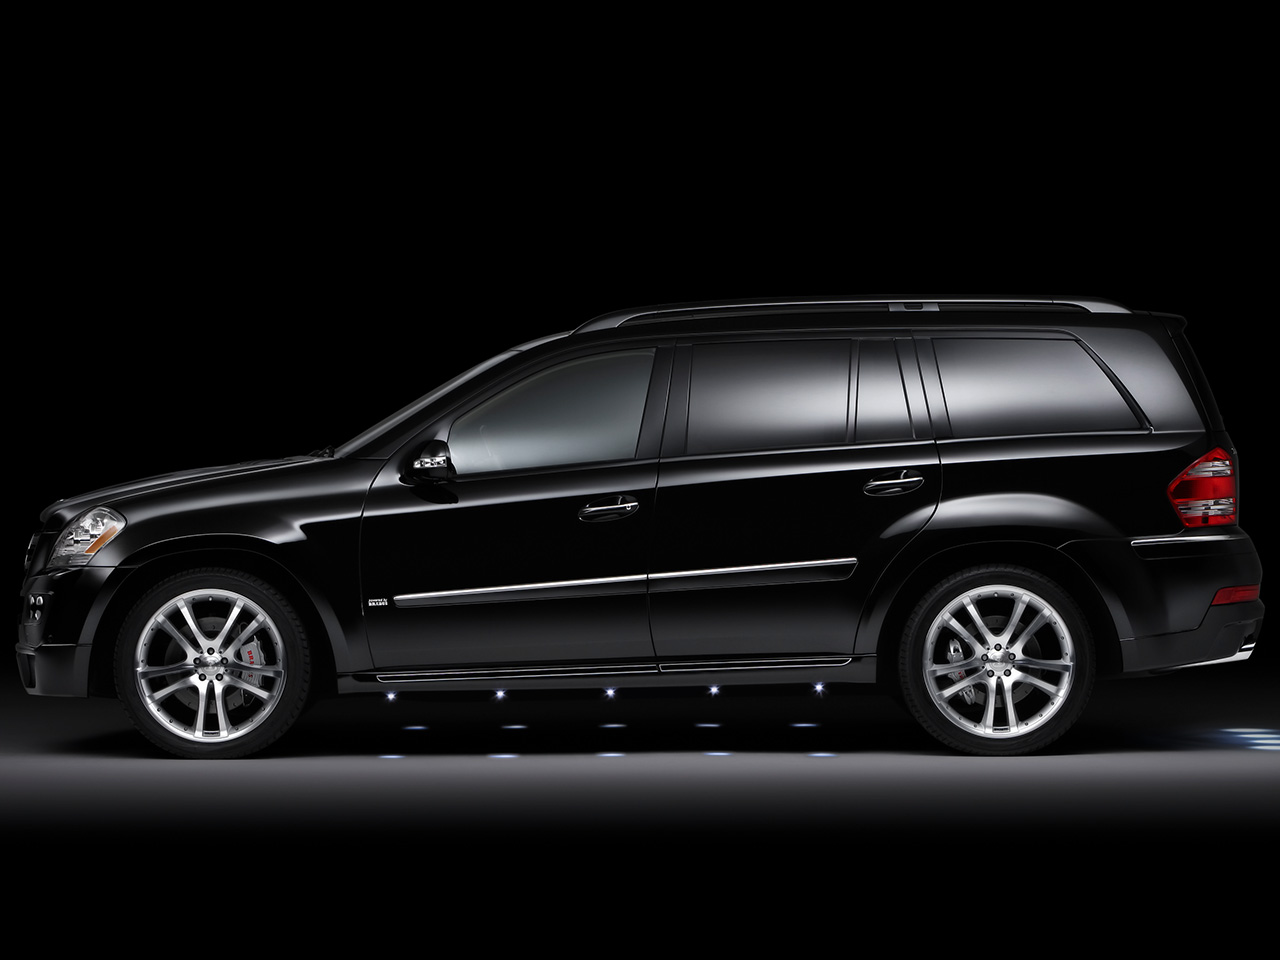 Mercedes Benz Gl Class Background Full HD Pictures